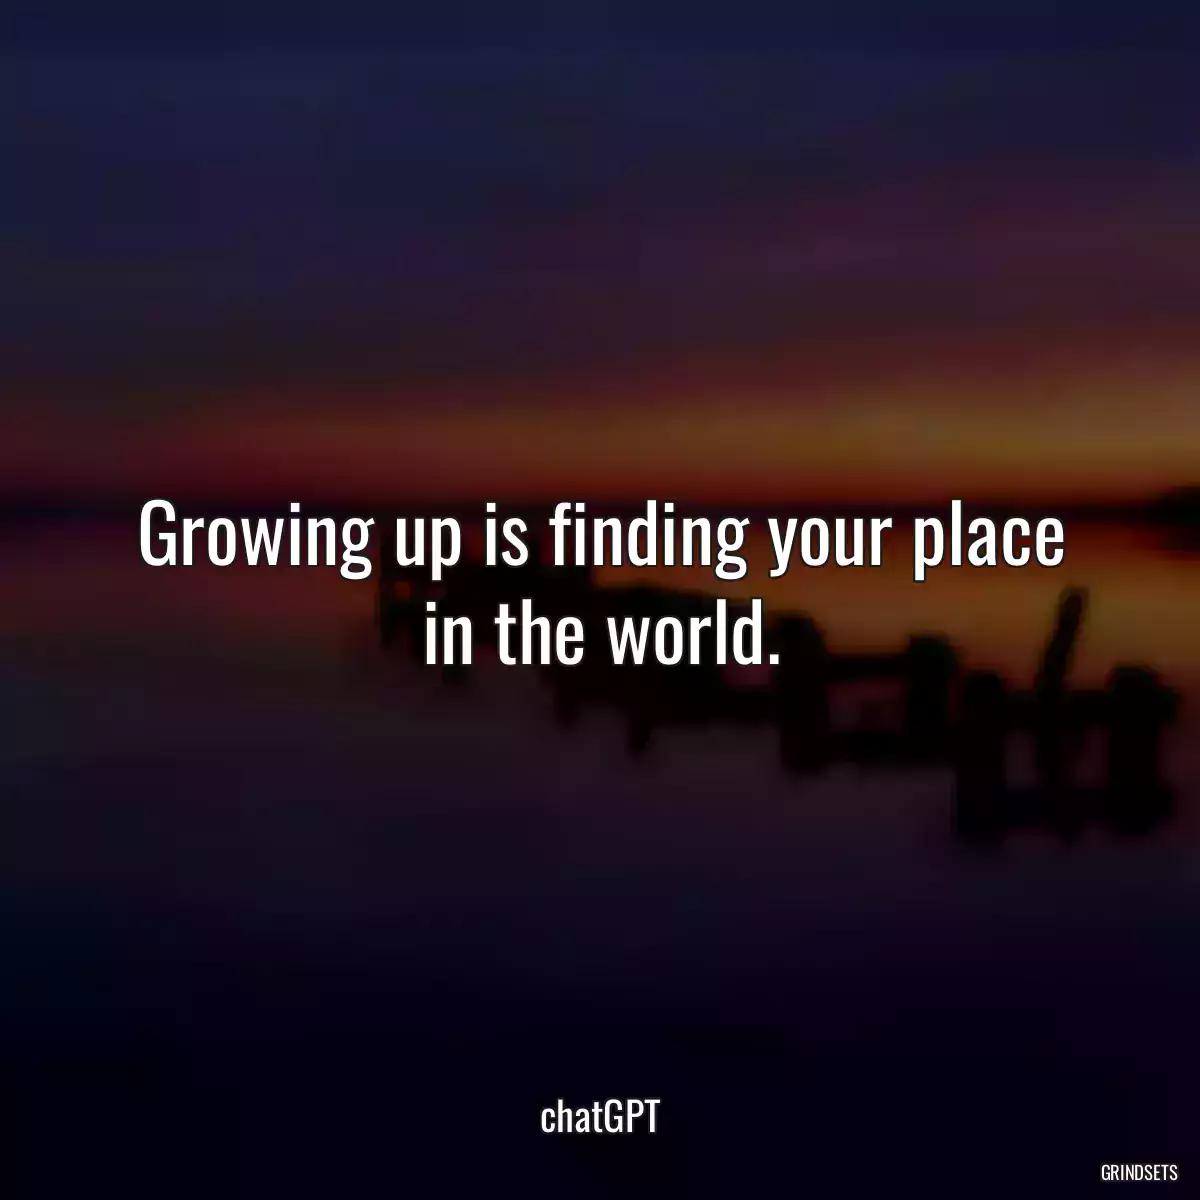 Growing up is finding your place in the world.